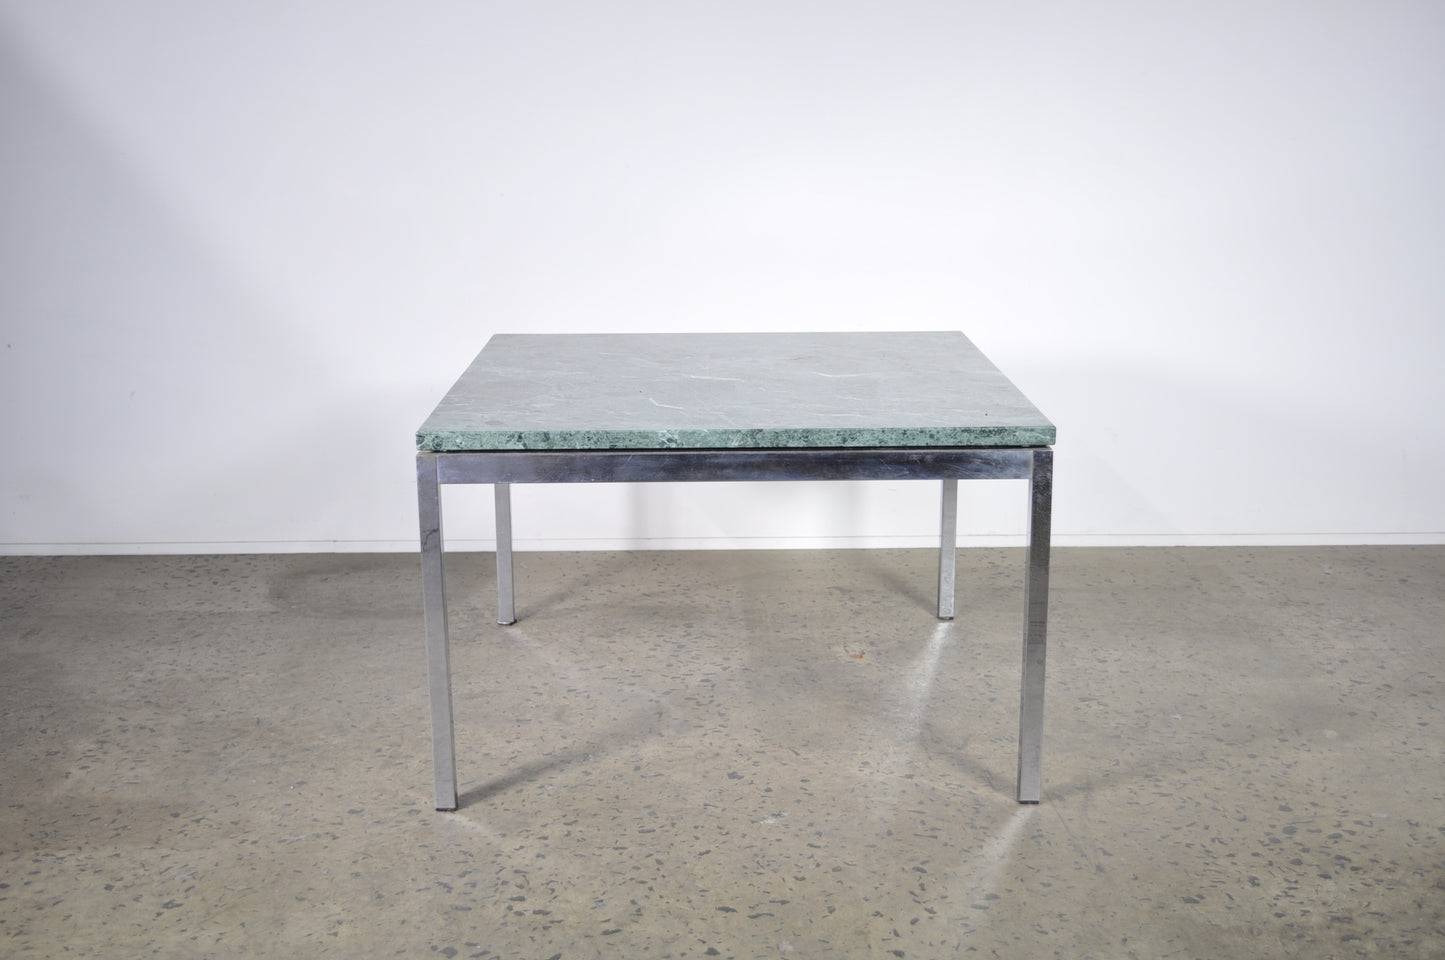 KNOLL marble table by Florence Knoll in Verdi Marble.